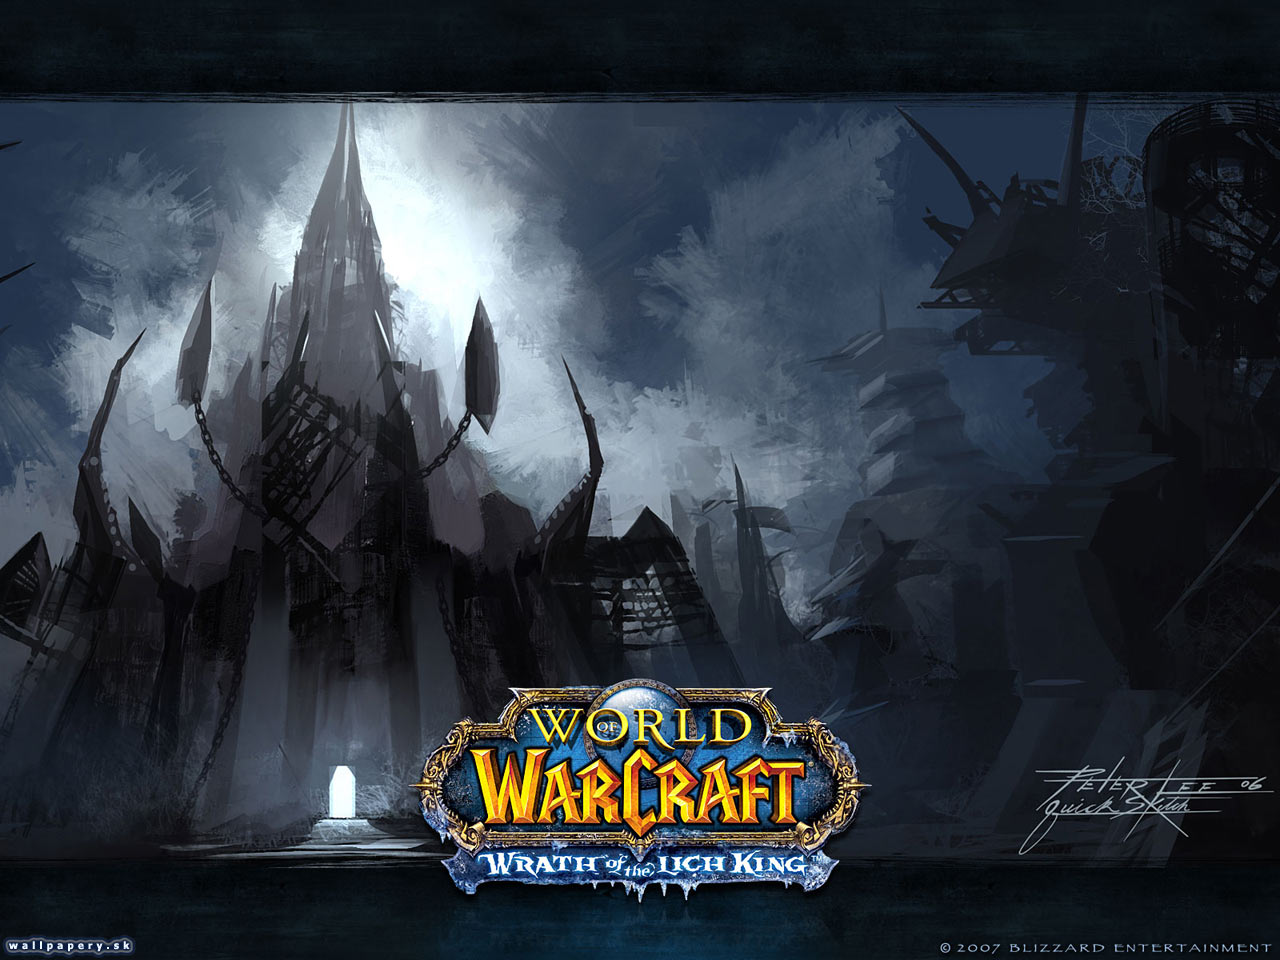 World of Warcraft: Wrath of the Lich King - wallpaper 3